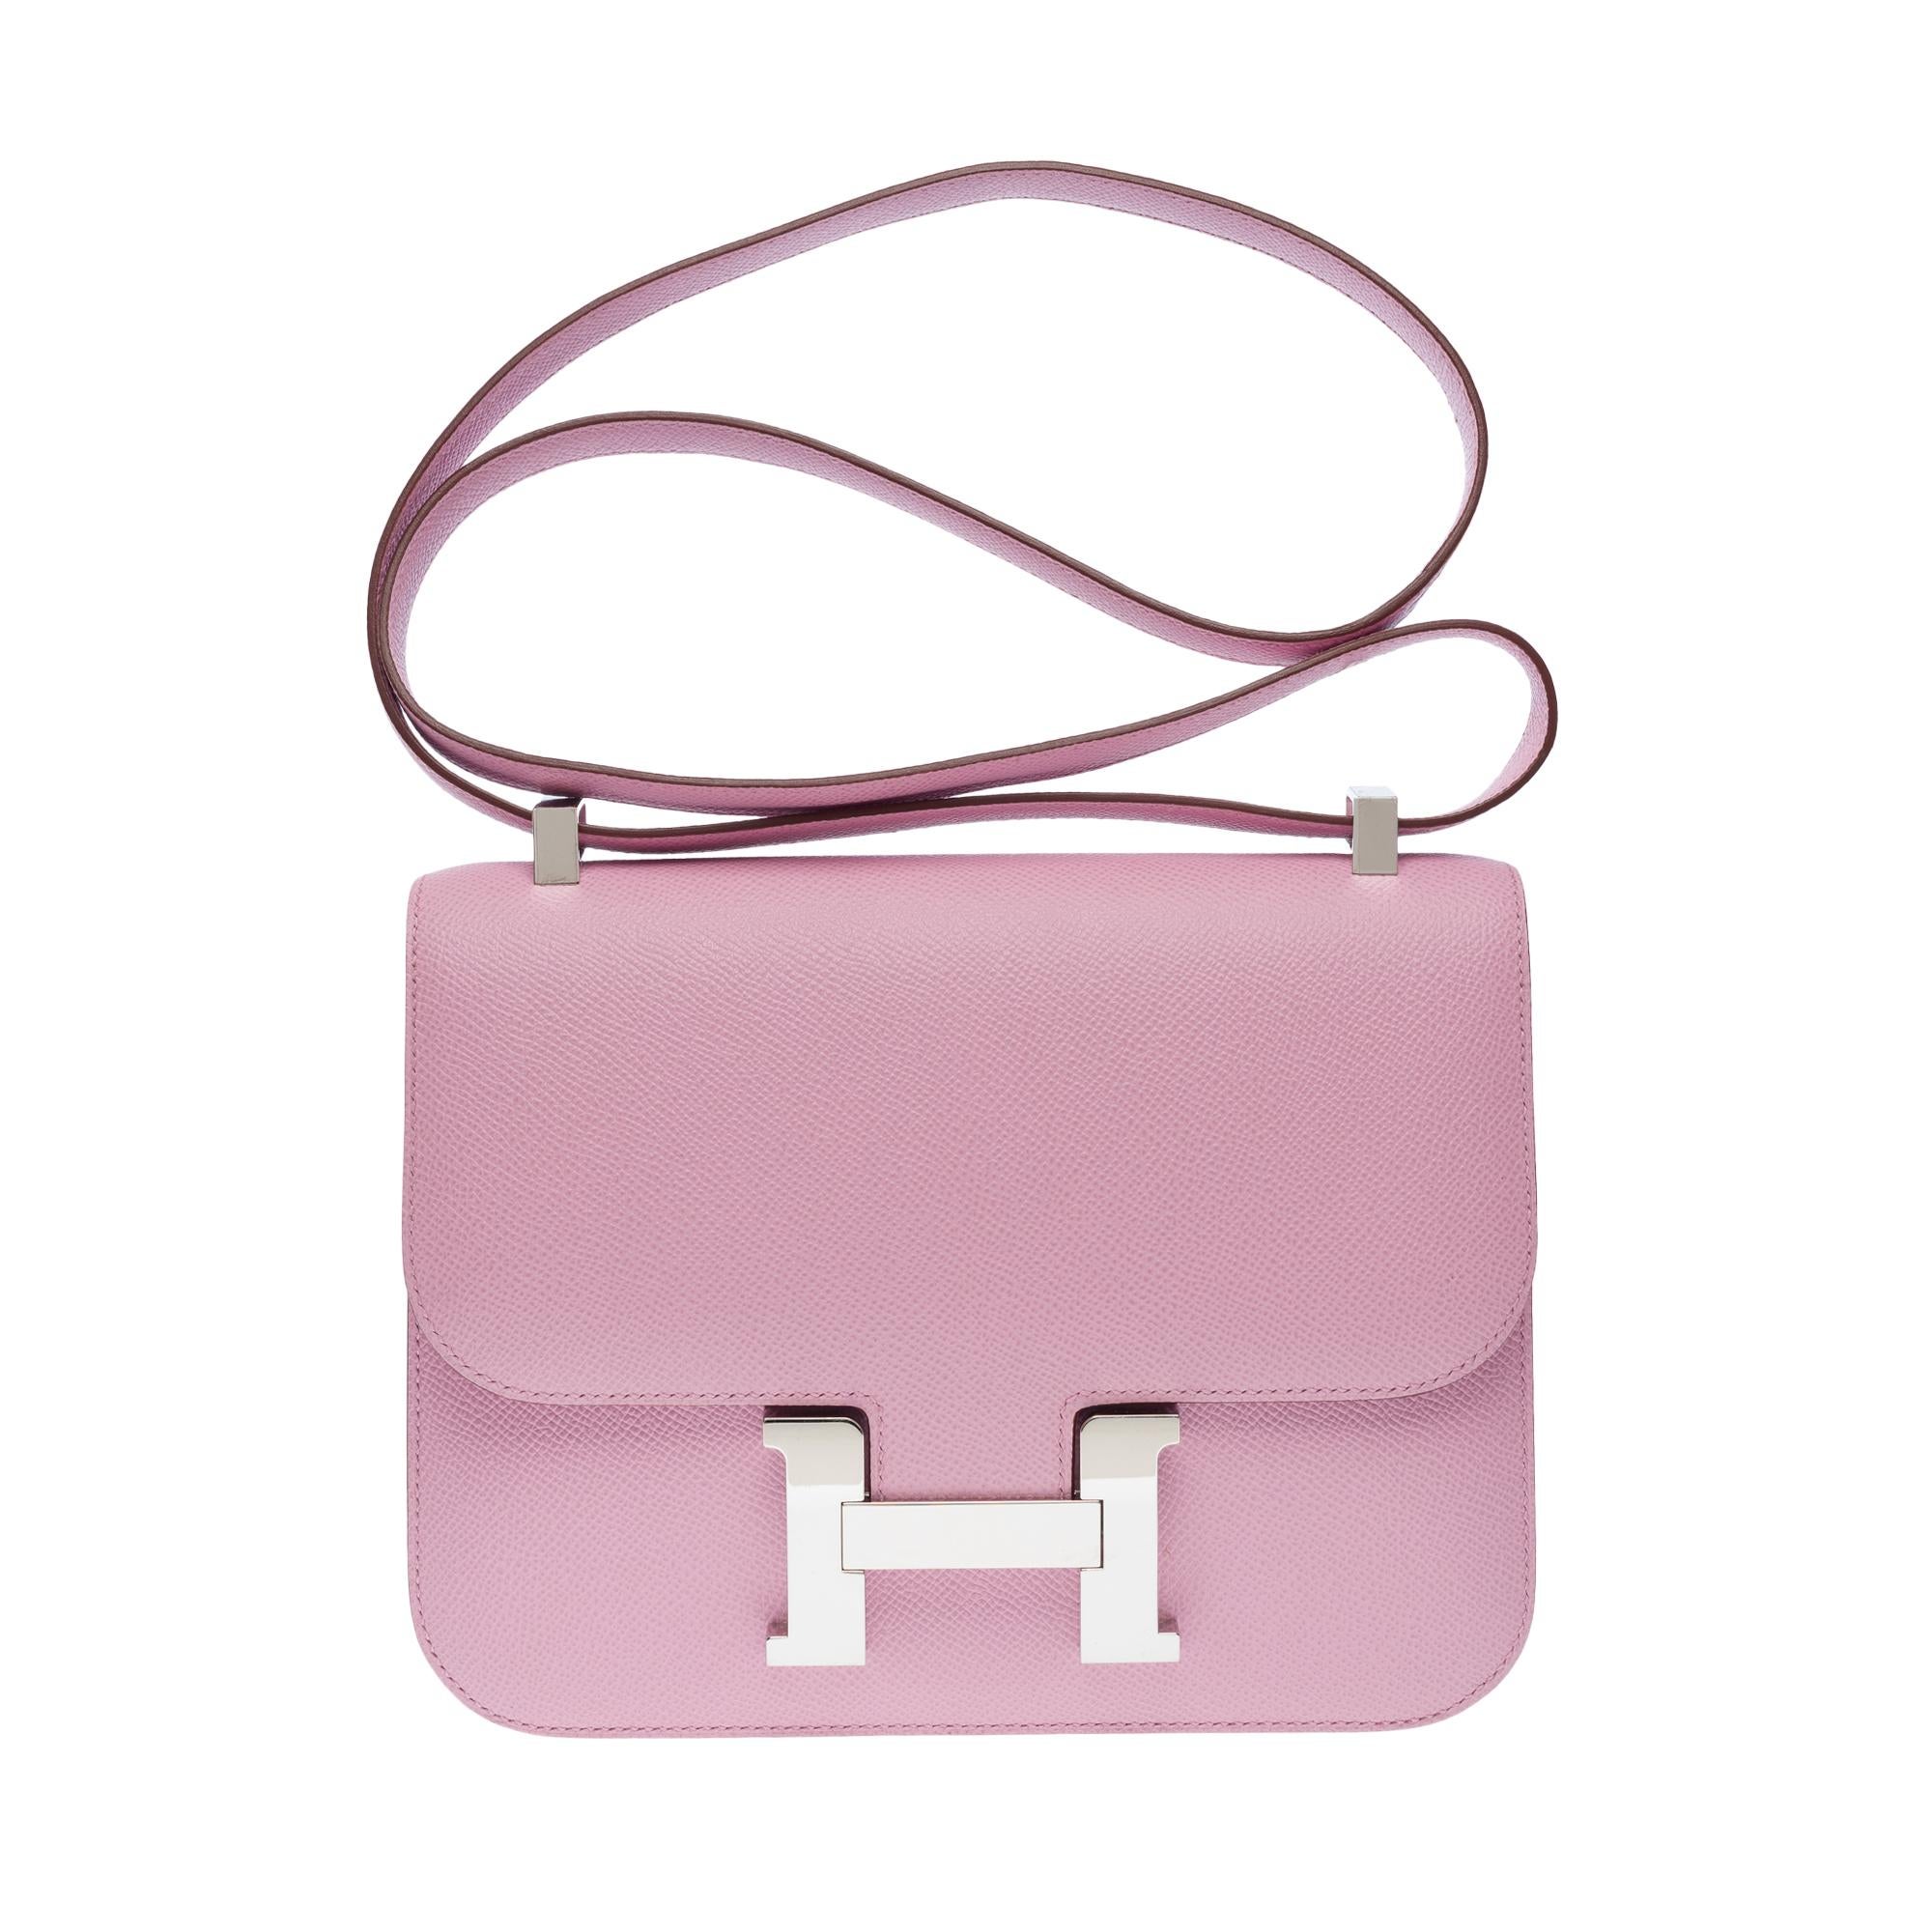 Amazing Hermès Constance 23 Mirror shoulder bag in Mauve Sylvestre Epsom calf, palladium silver metal trim, a purple epsom leather shoulder strap allowing a shoulder or crossbody carry

Logo closure on flap
Purple leather lining, two compartments,